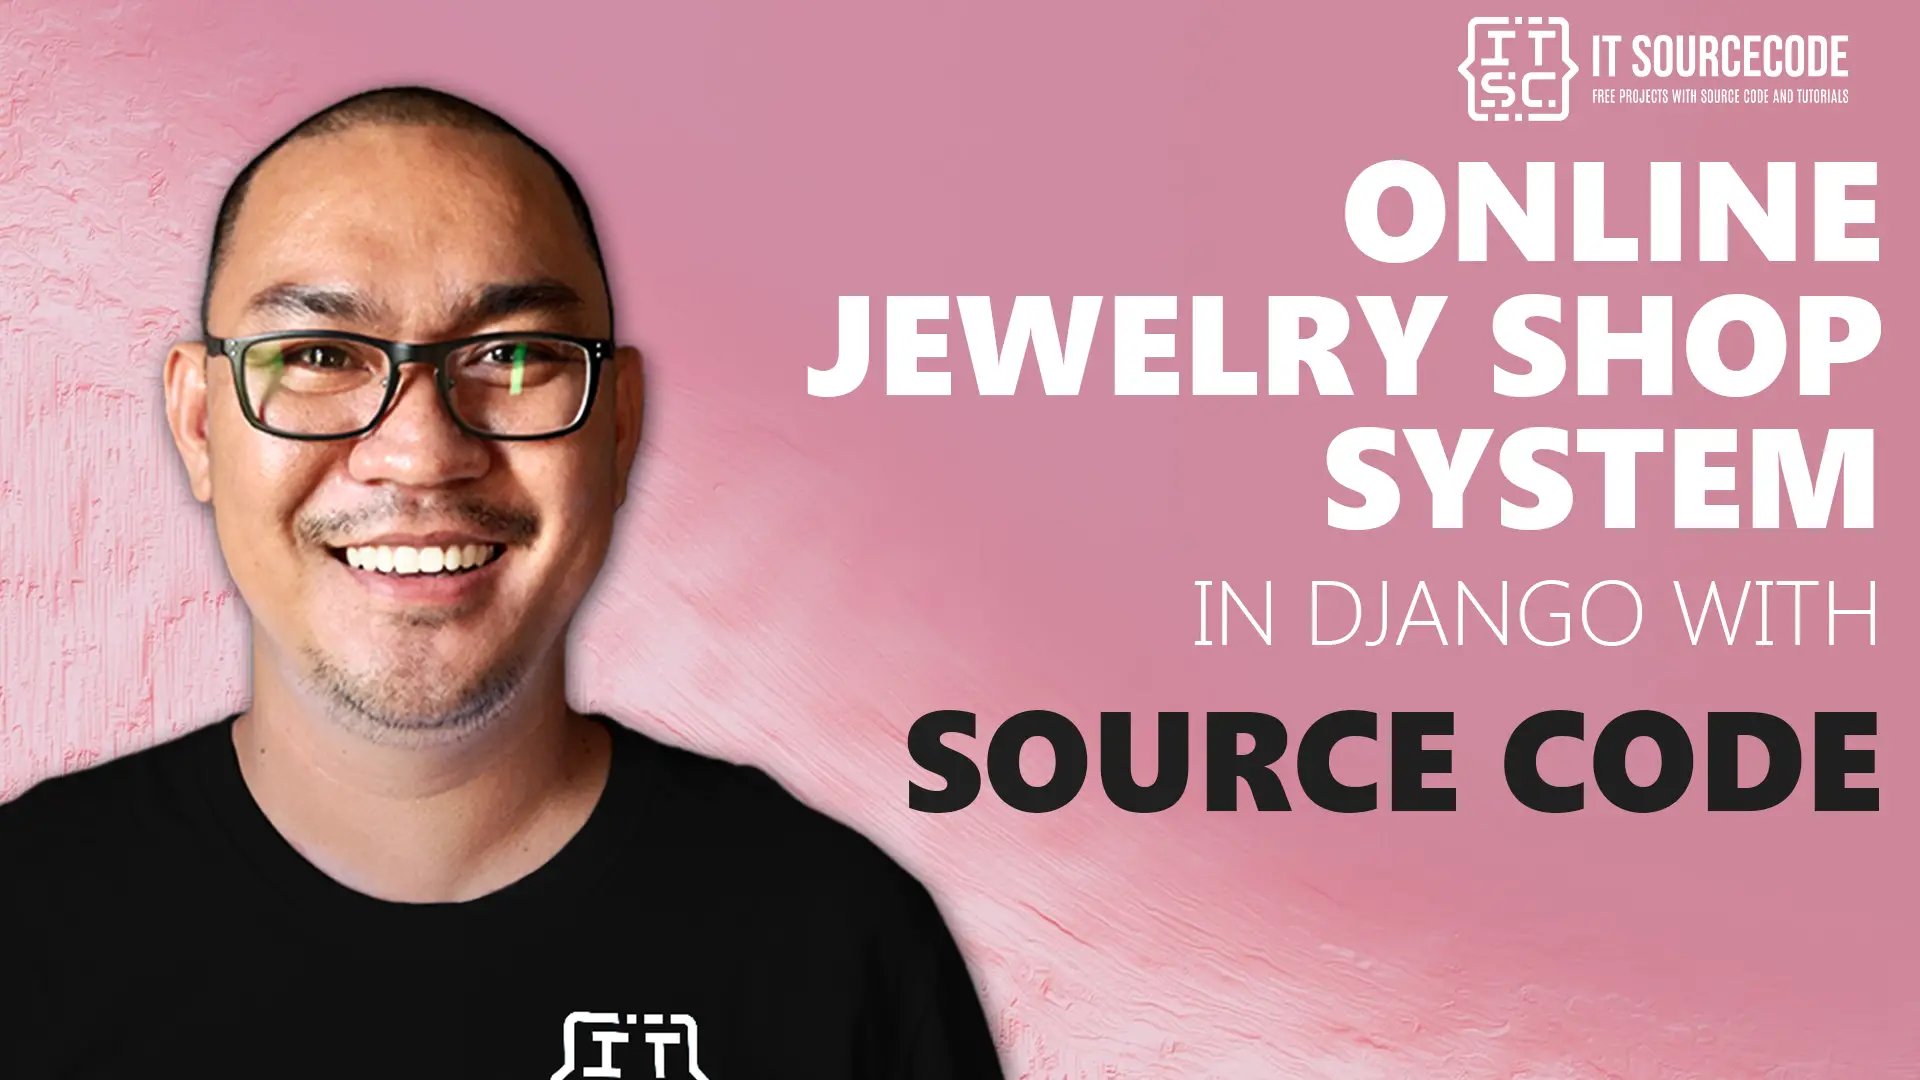 Online Jewelry Shop System in Django with Source Code